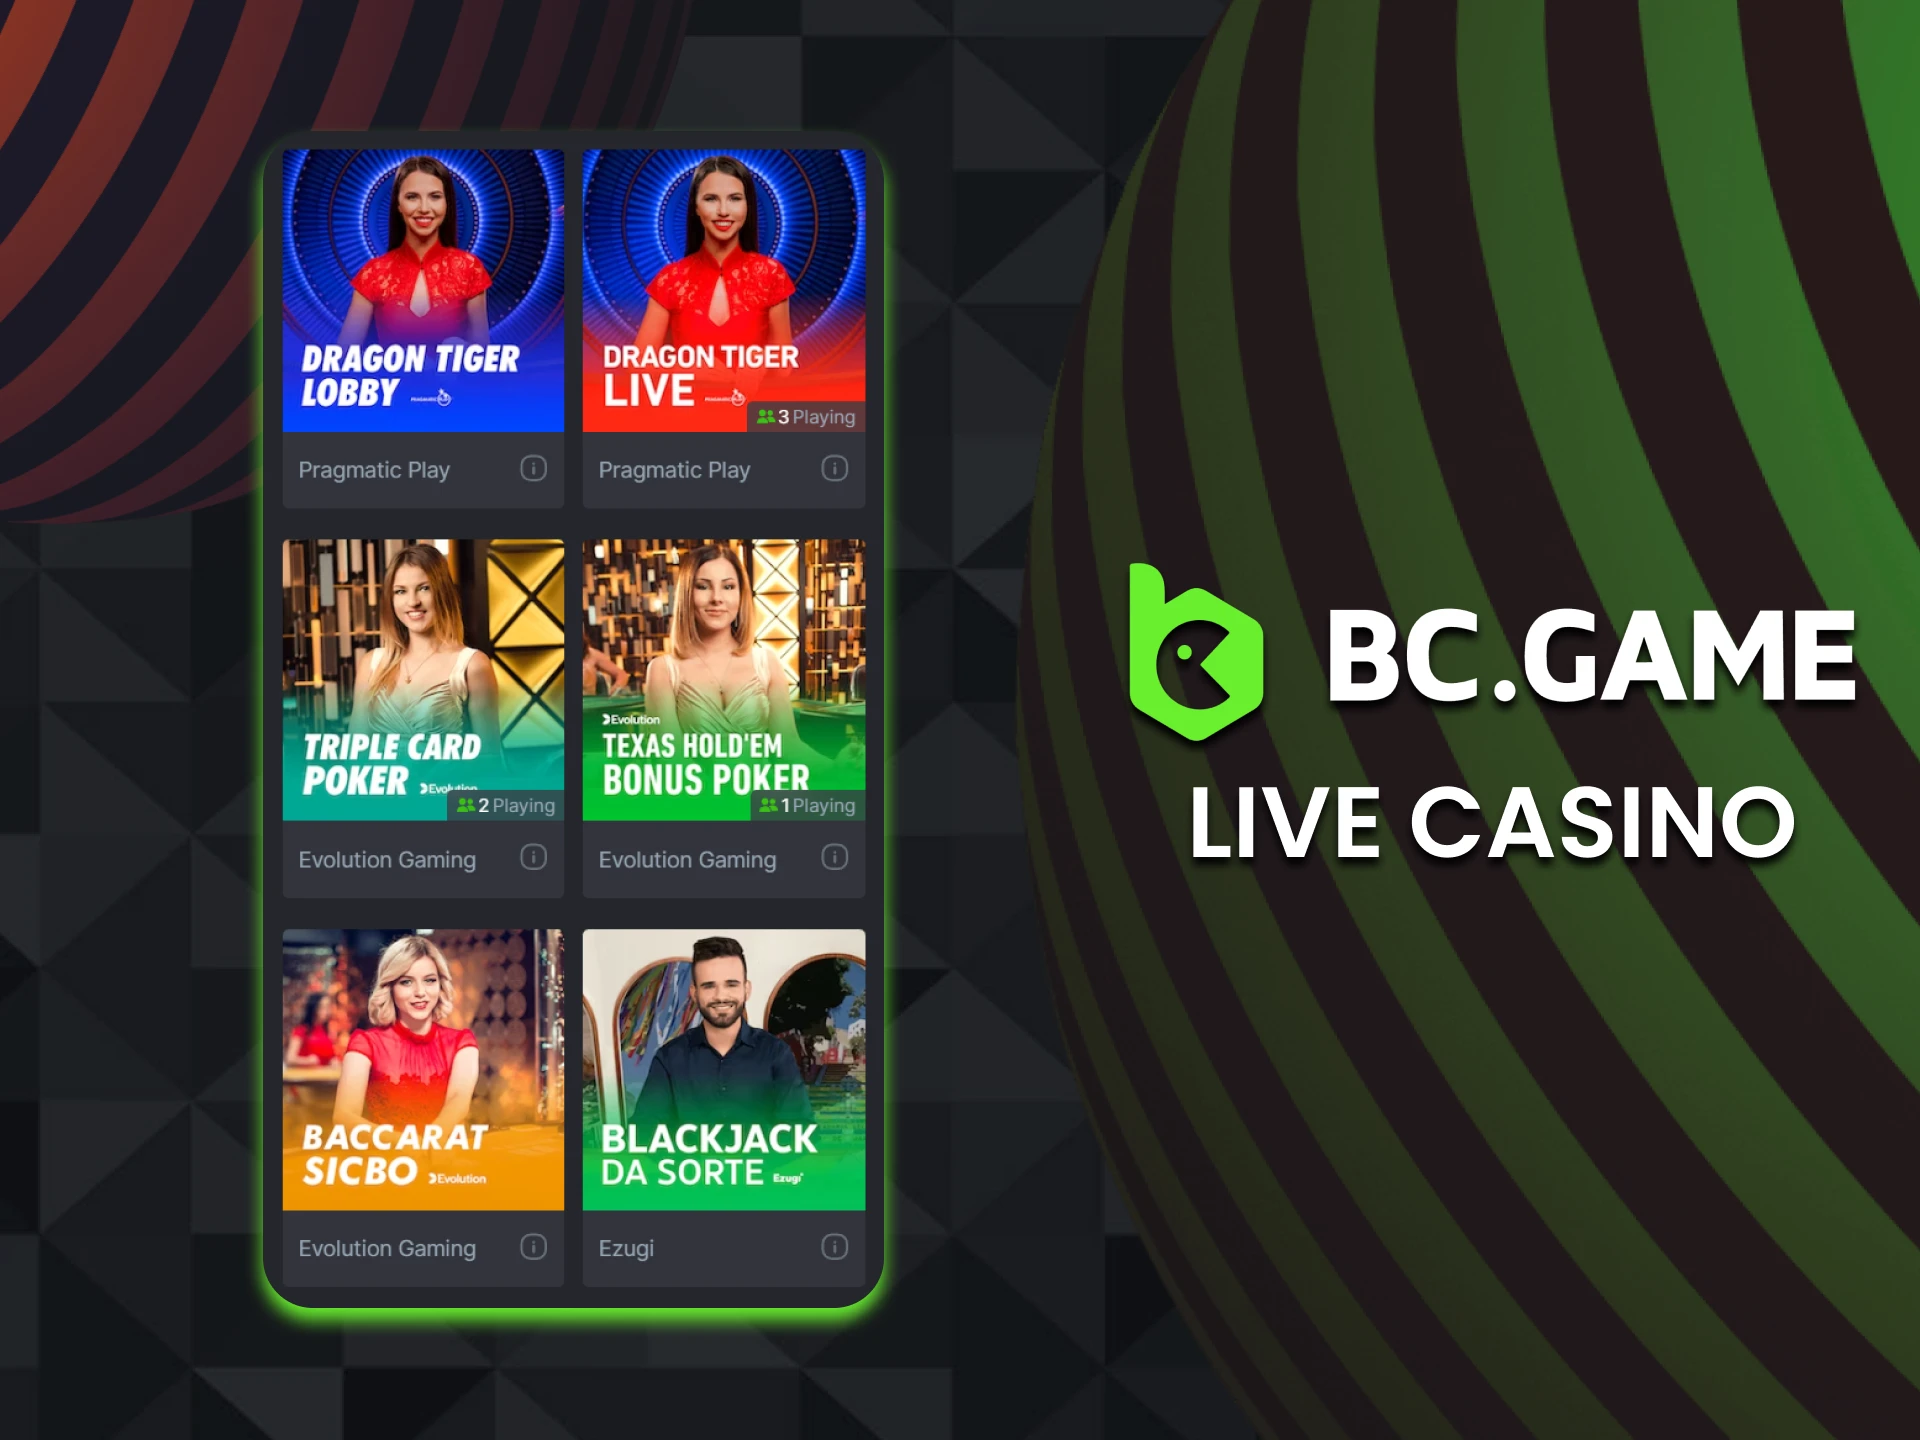 Play with real dealers at BC Game Live Casino section.